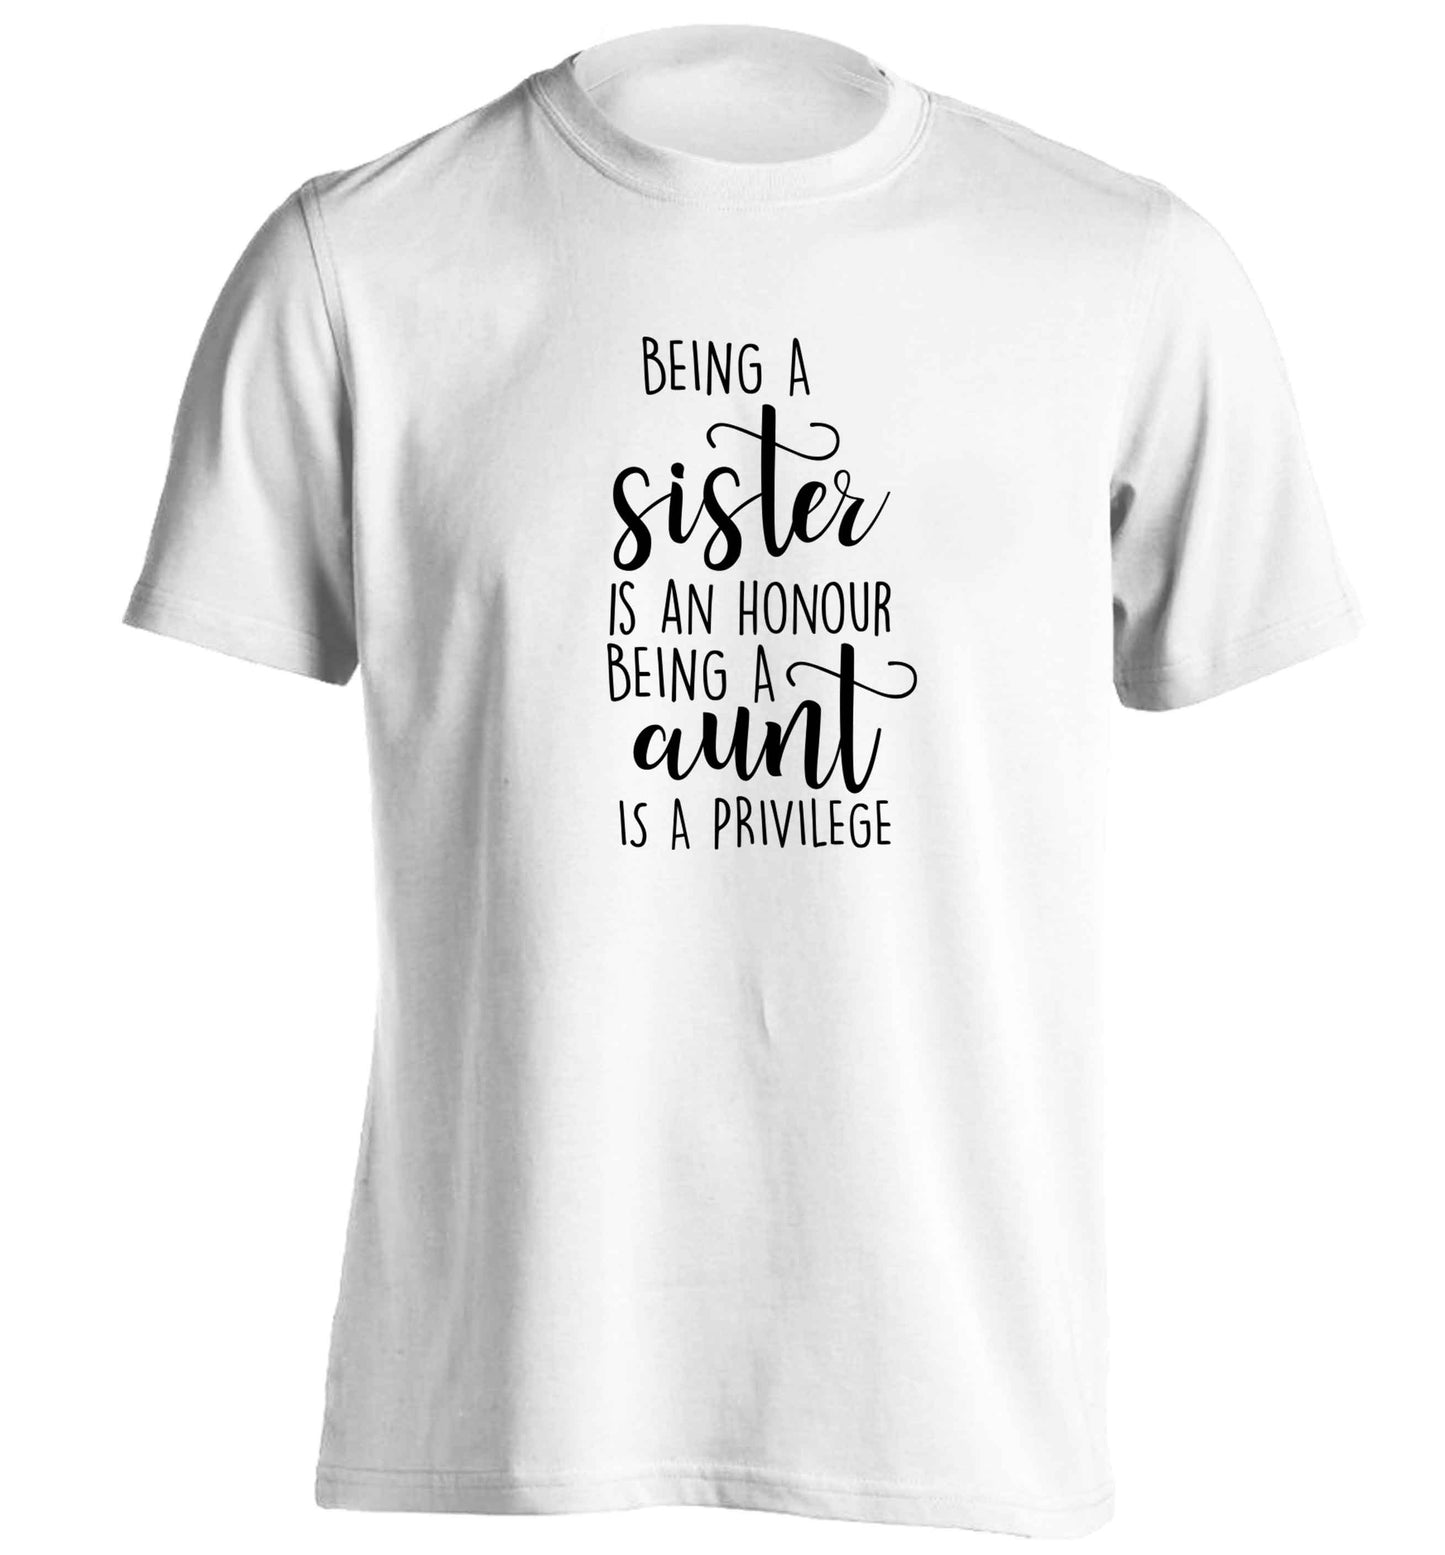 Being a sister is an honour being an auntie is a privilege adults unisex white Tshirt 2XL